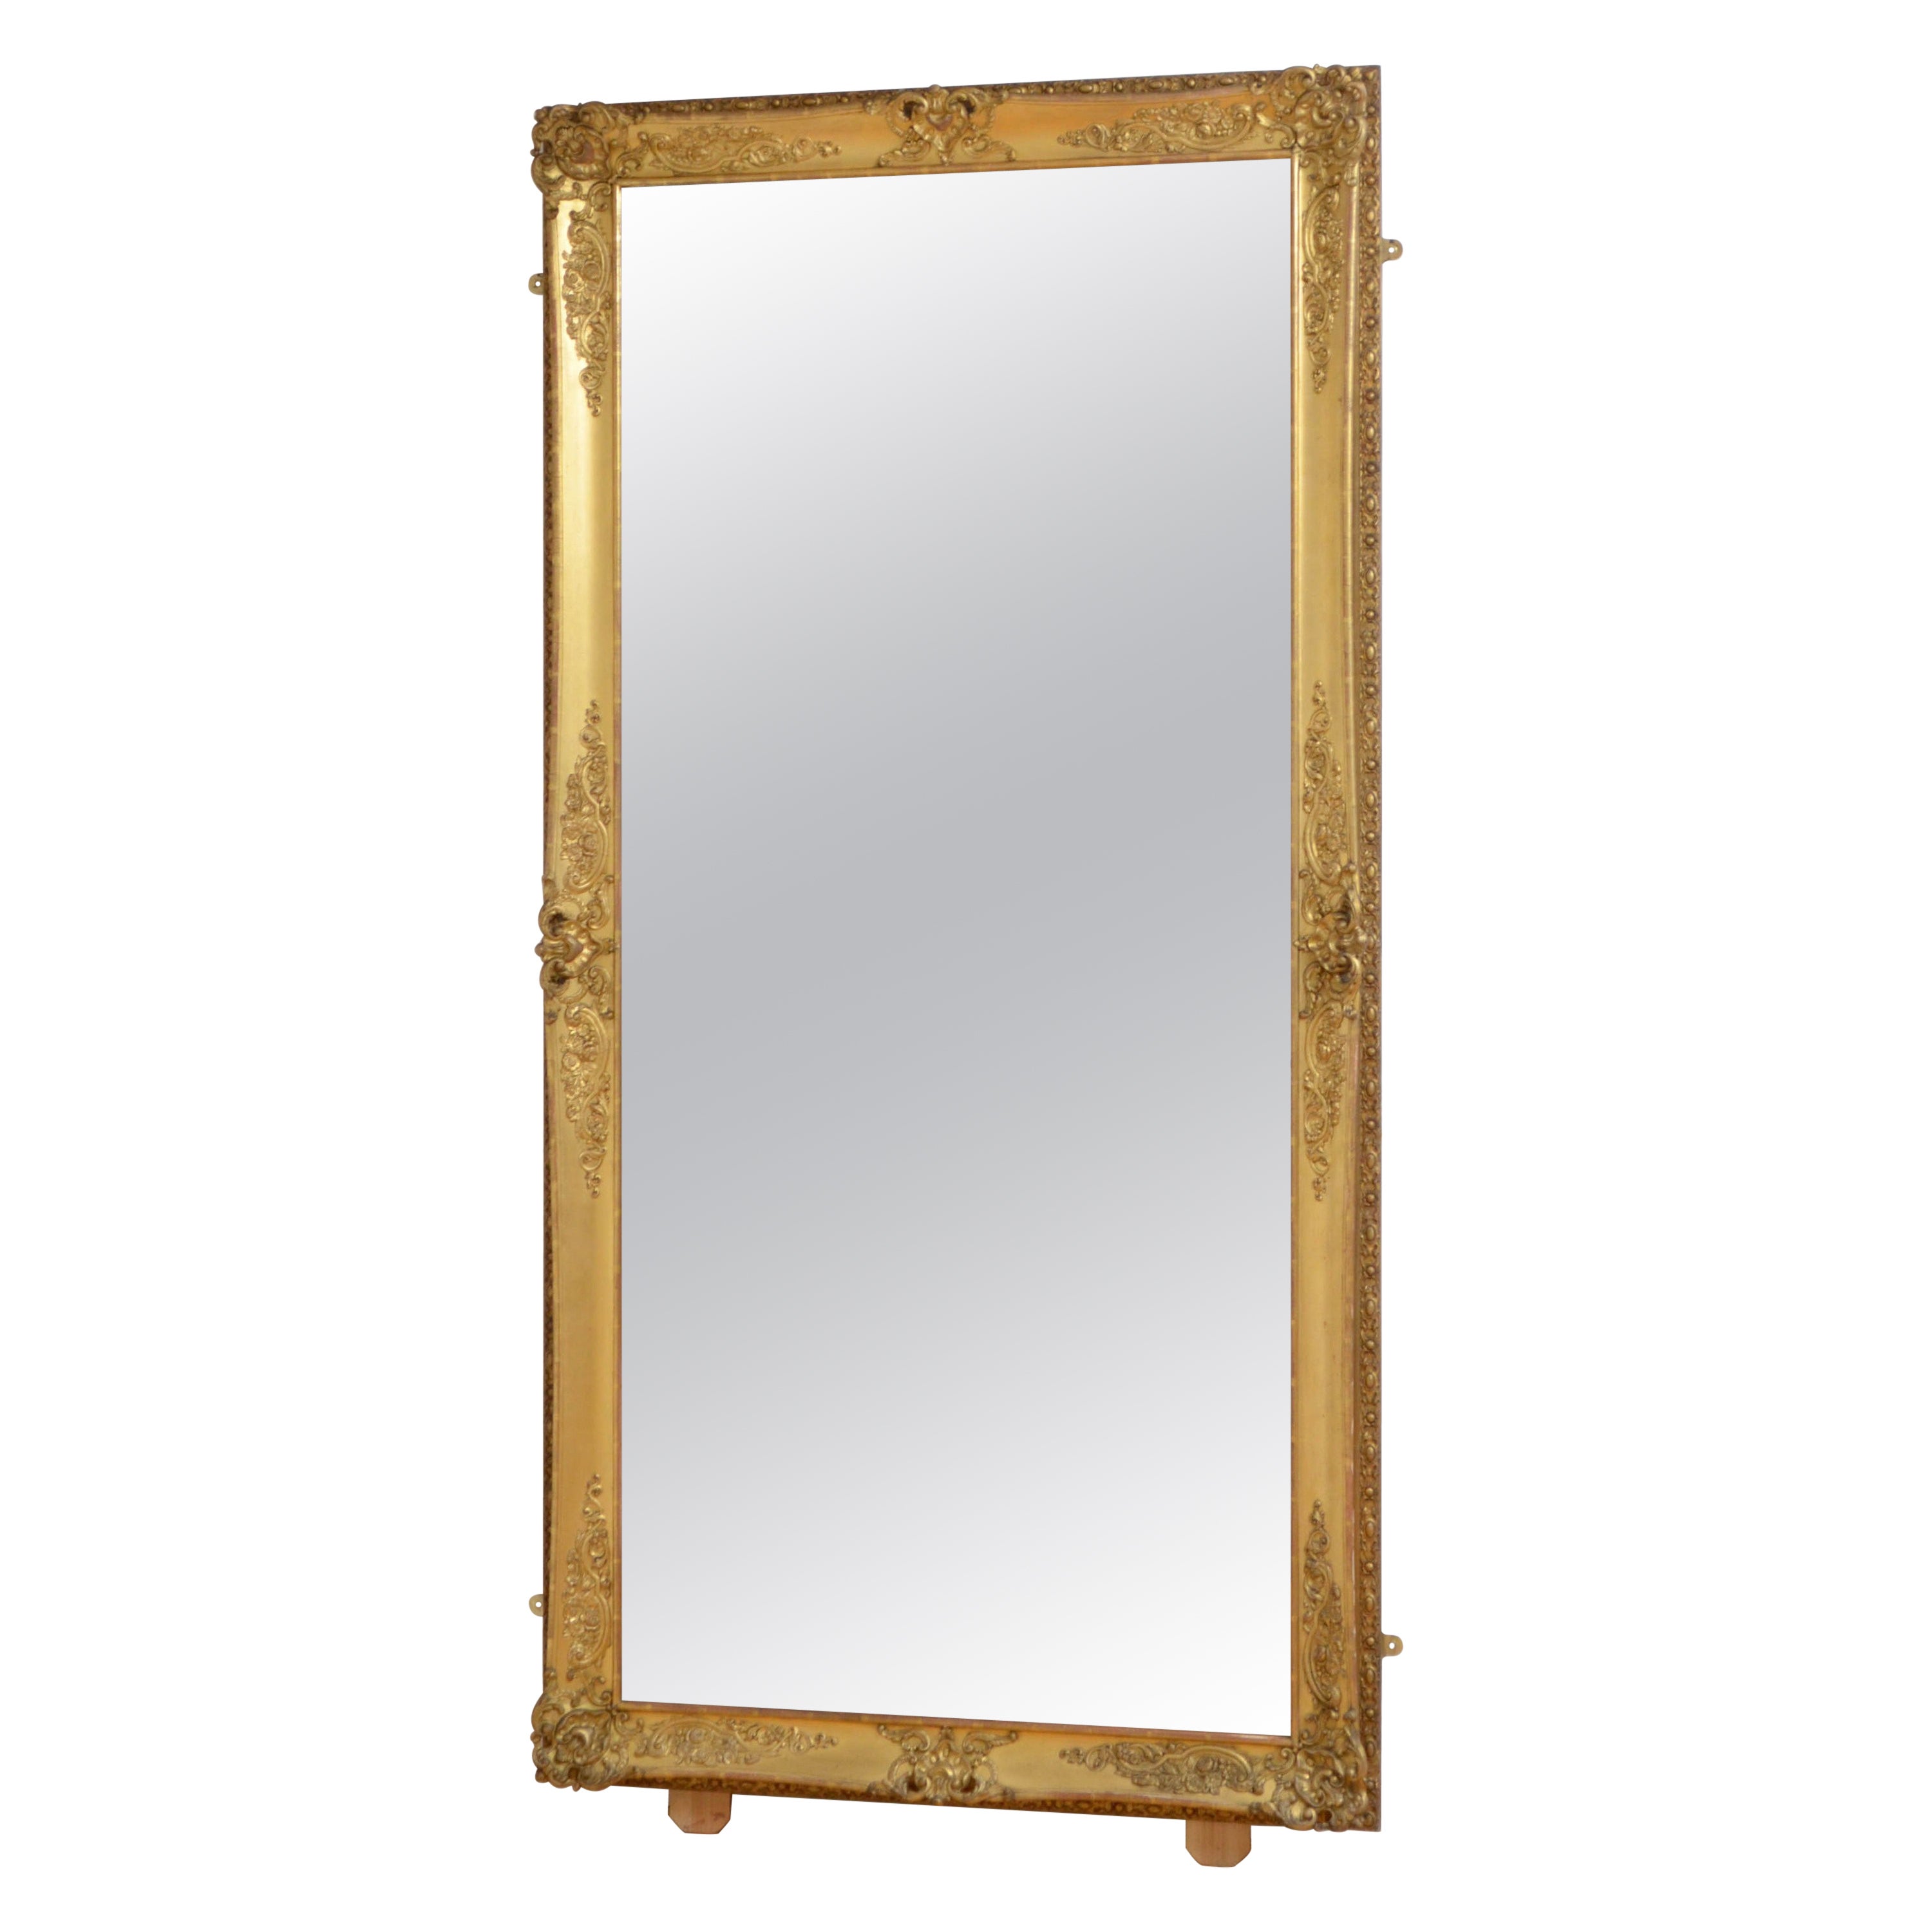 Superb 19th Century Leaner or Wall Mirror For Sale